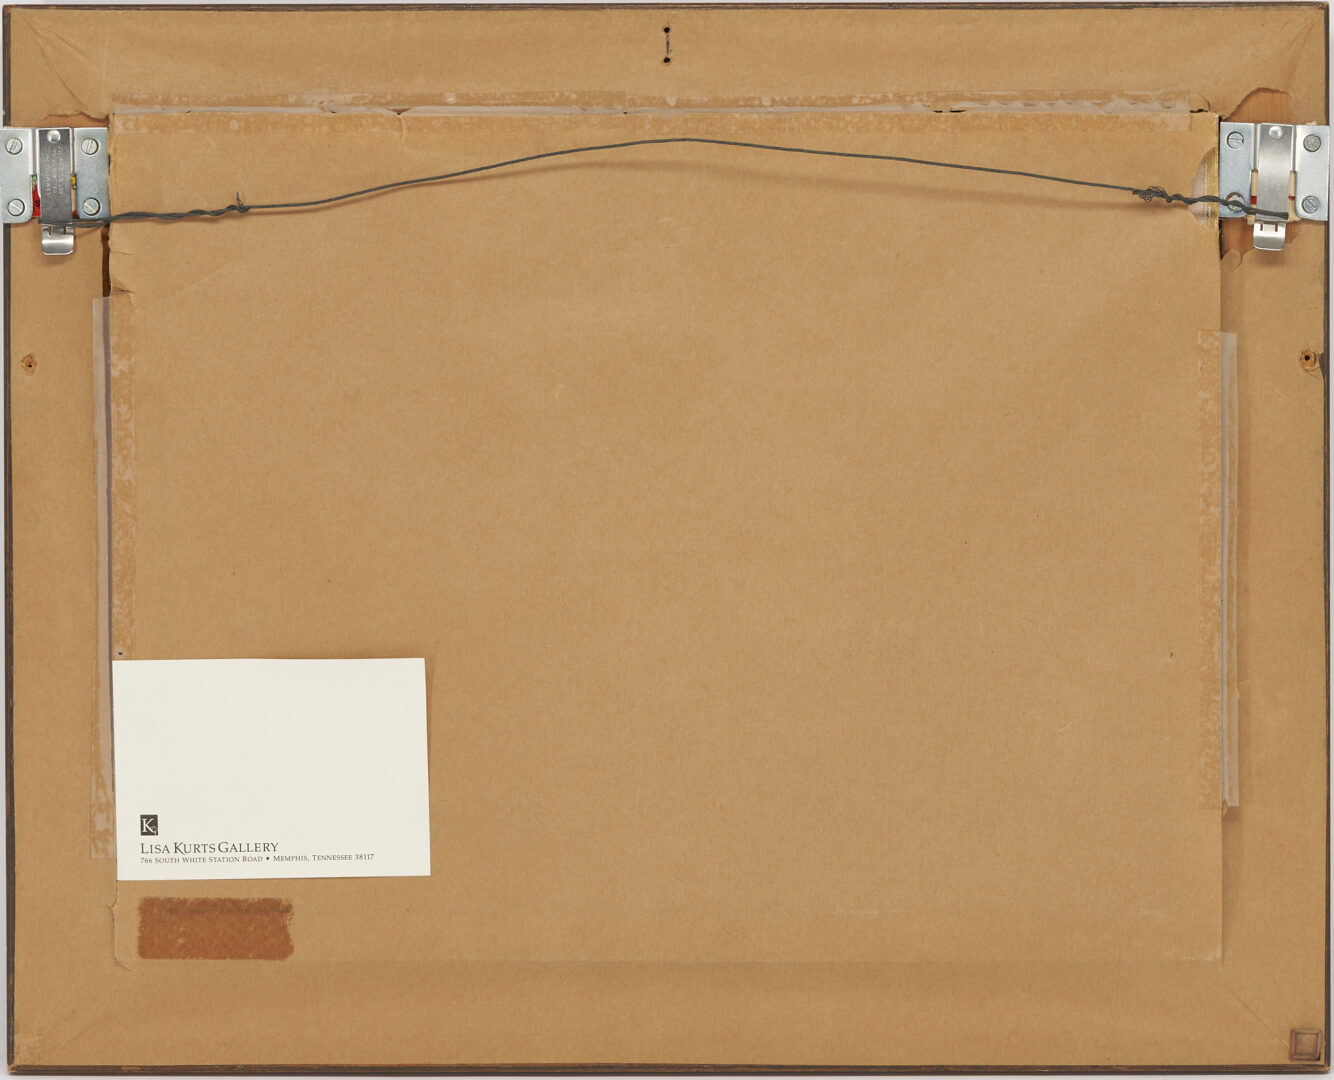 Lot 154: Carroll Cloar Painting, Post Office Cafe, 1975